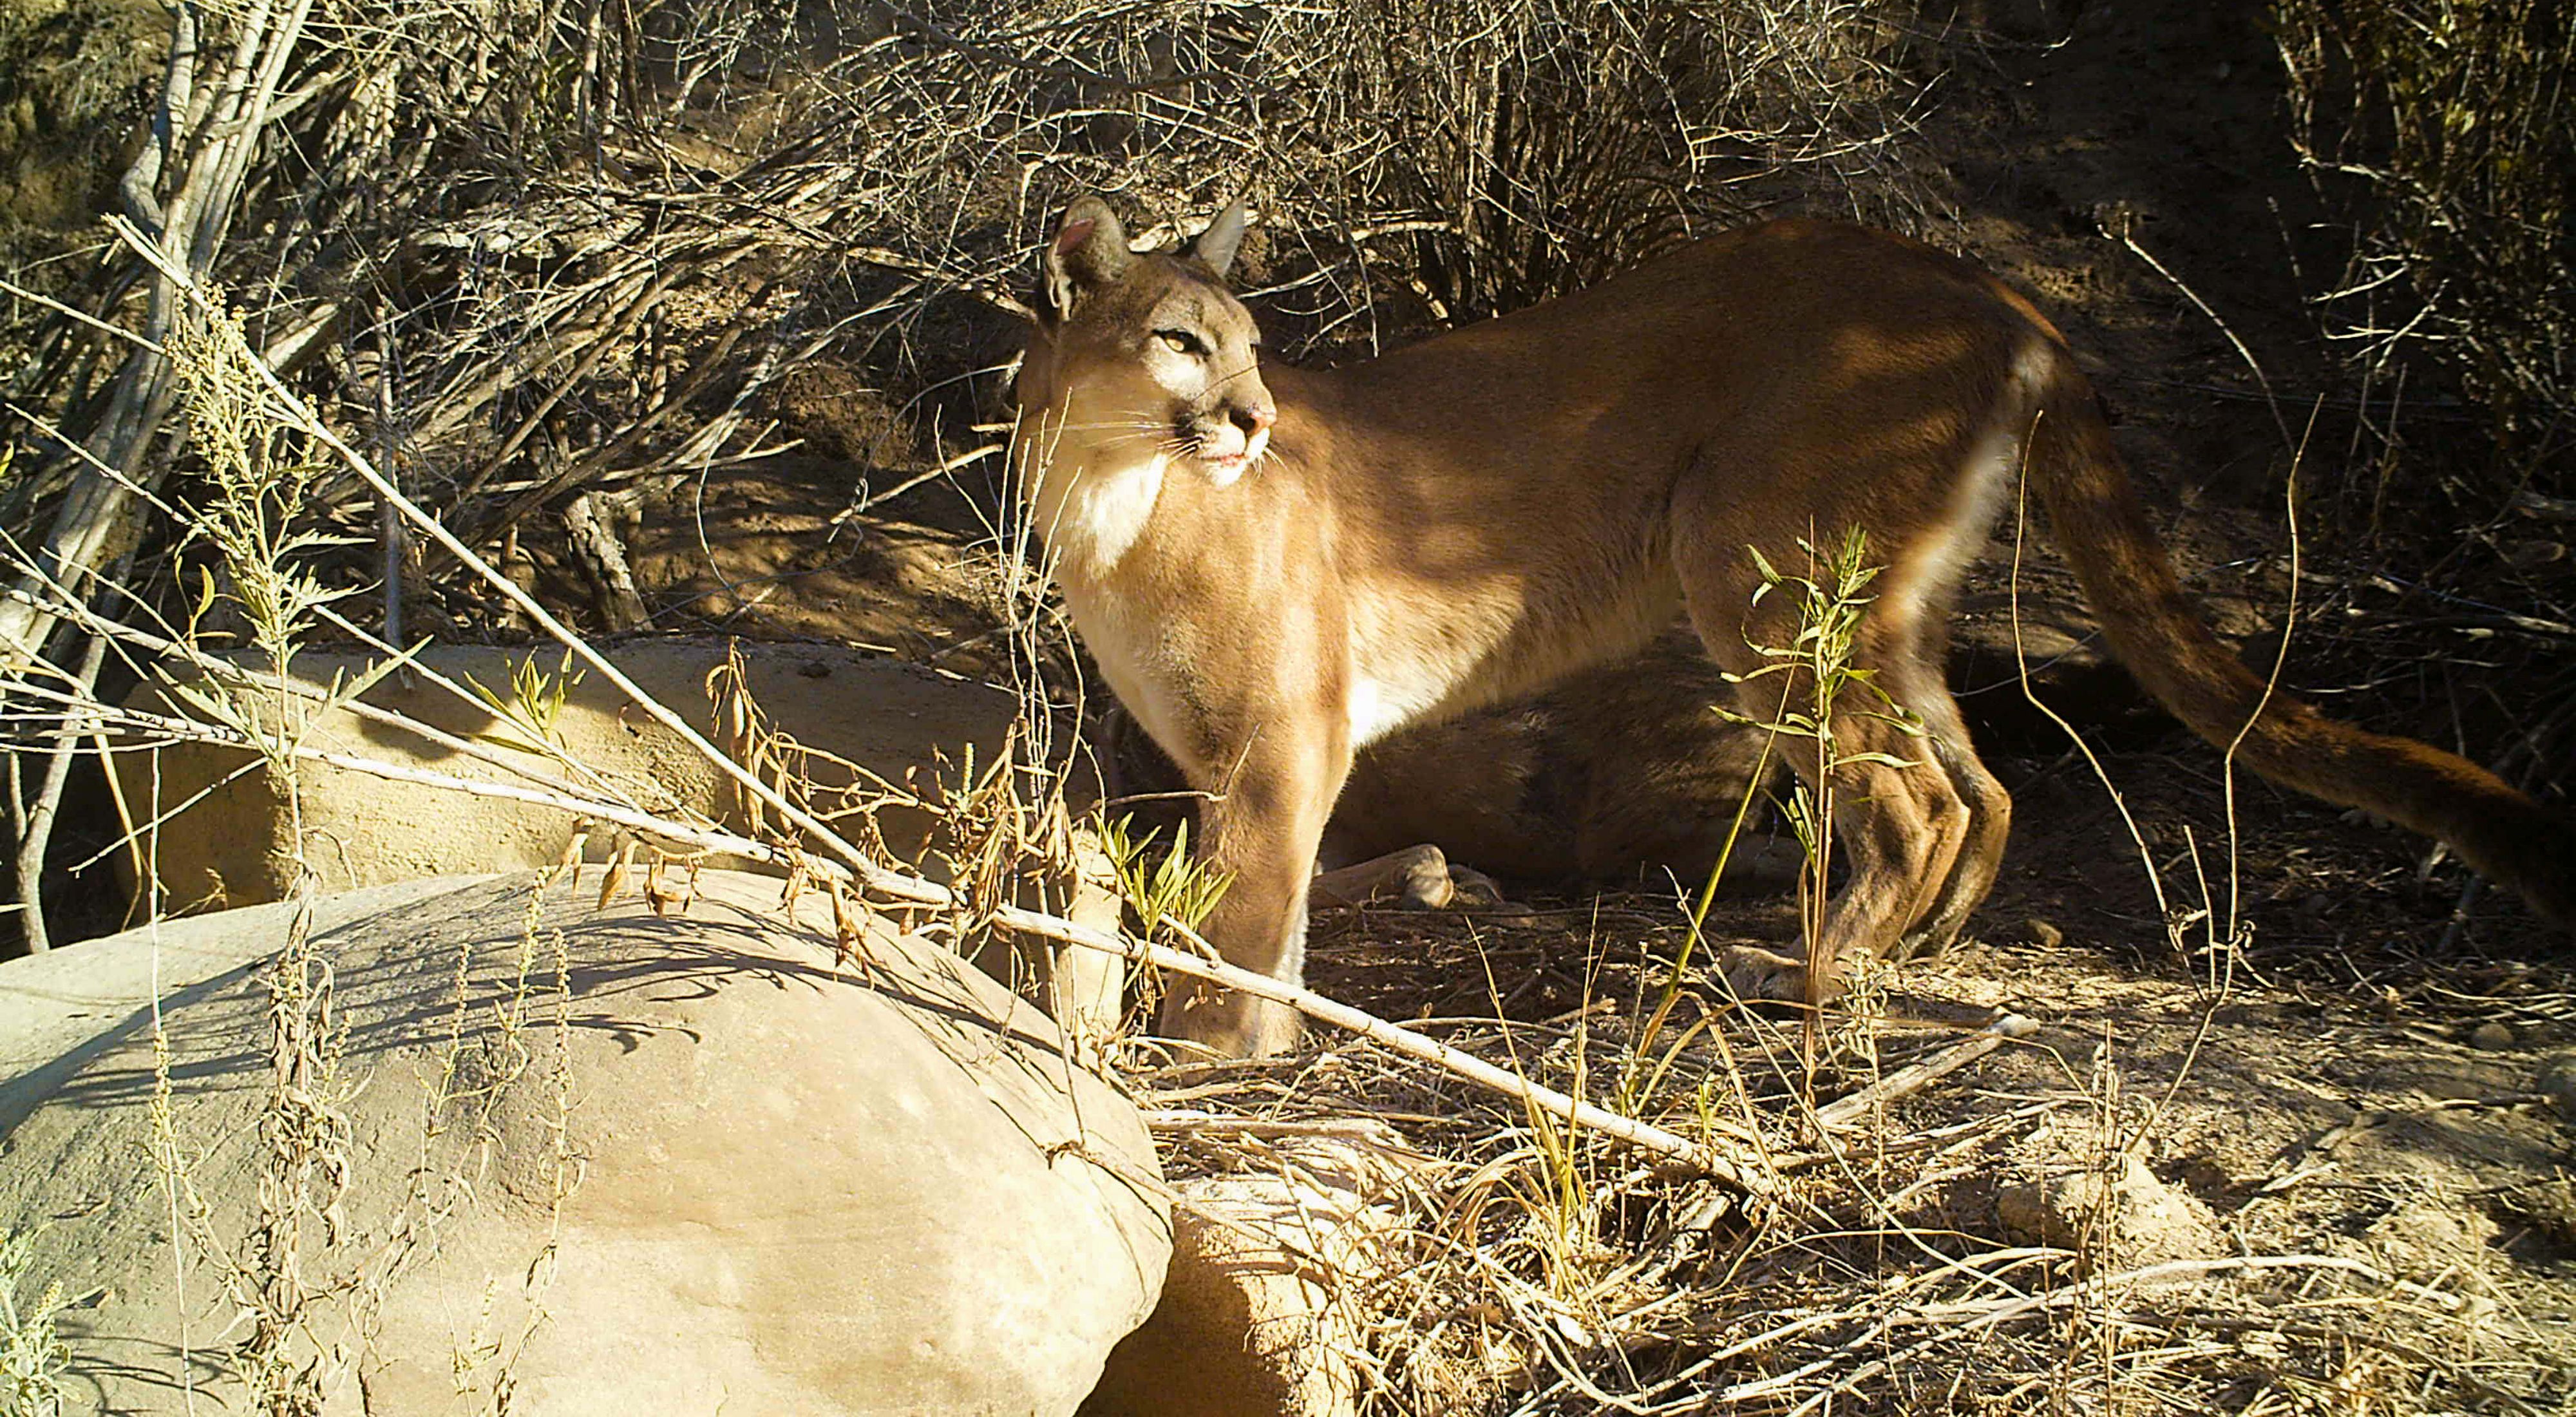 Researchers in Southern California set up camera traps to monitor and track the movement of mountain lions.